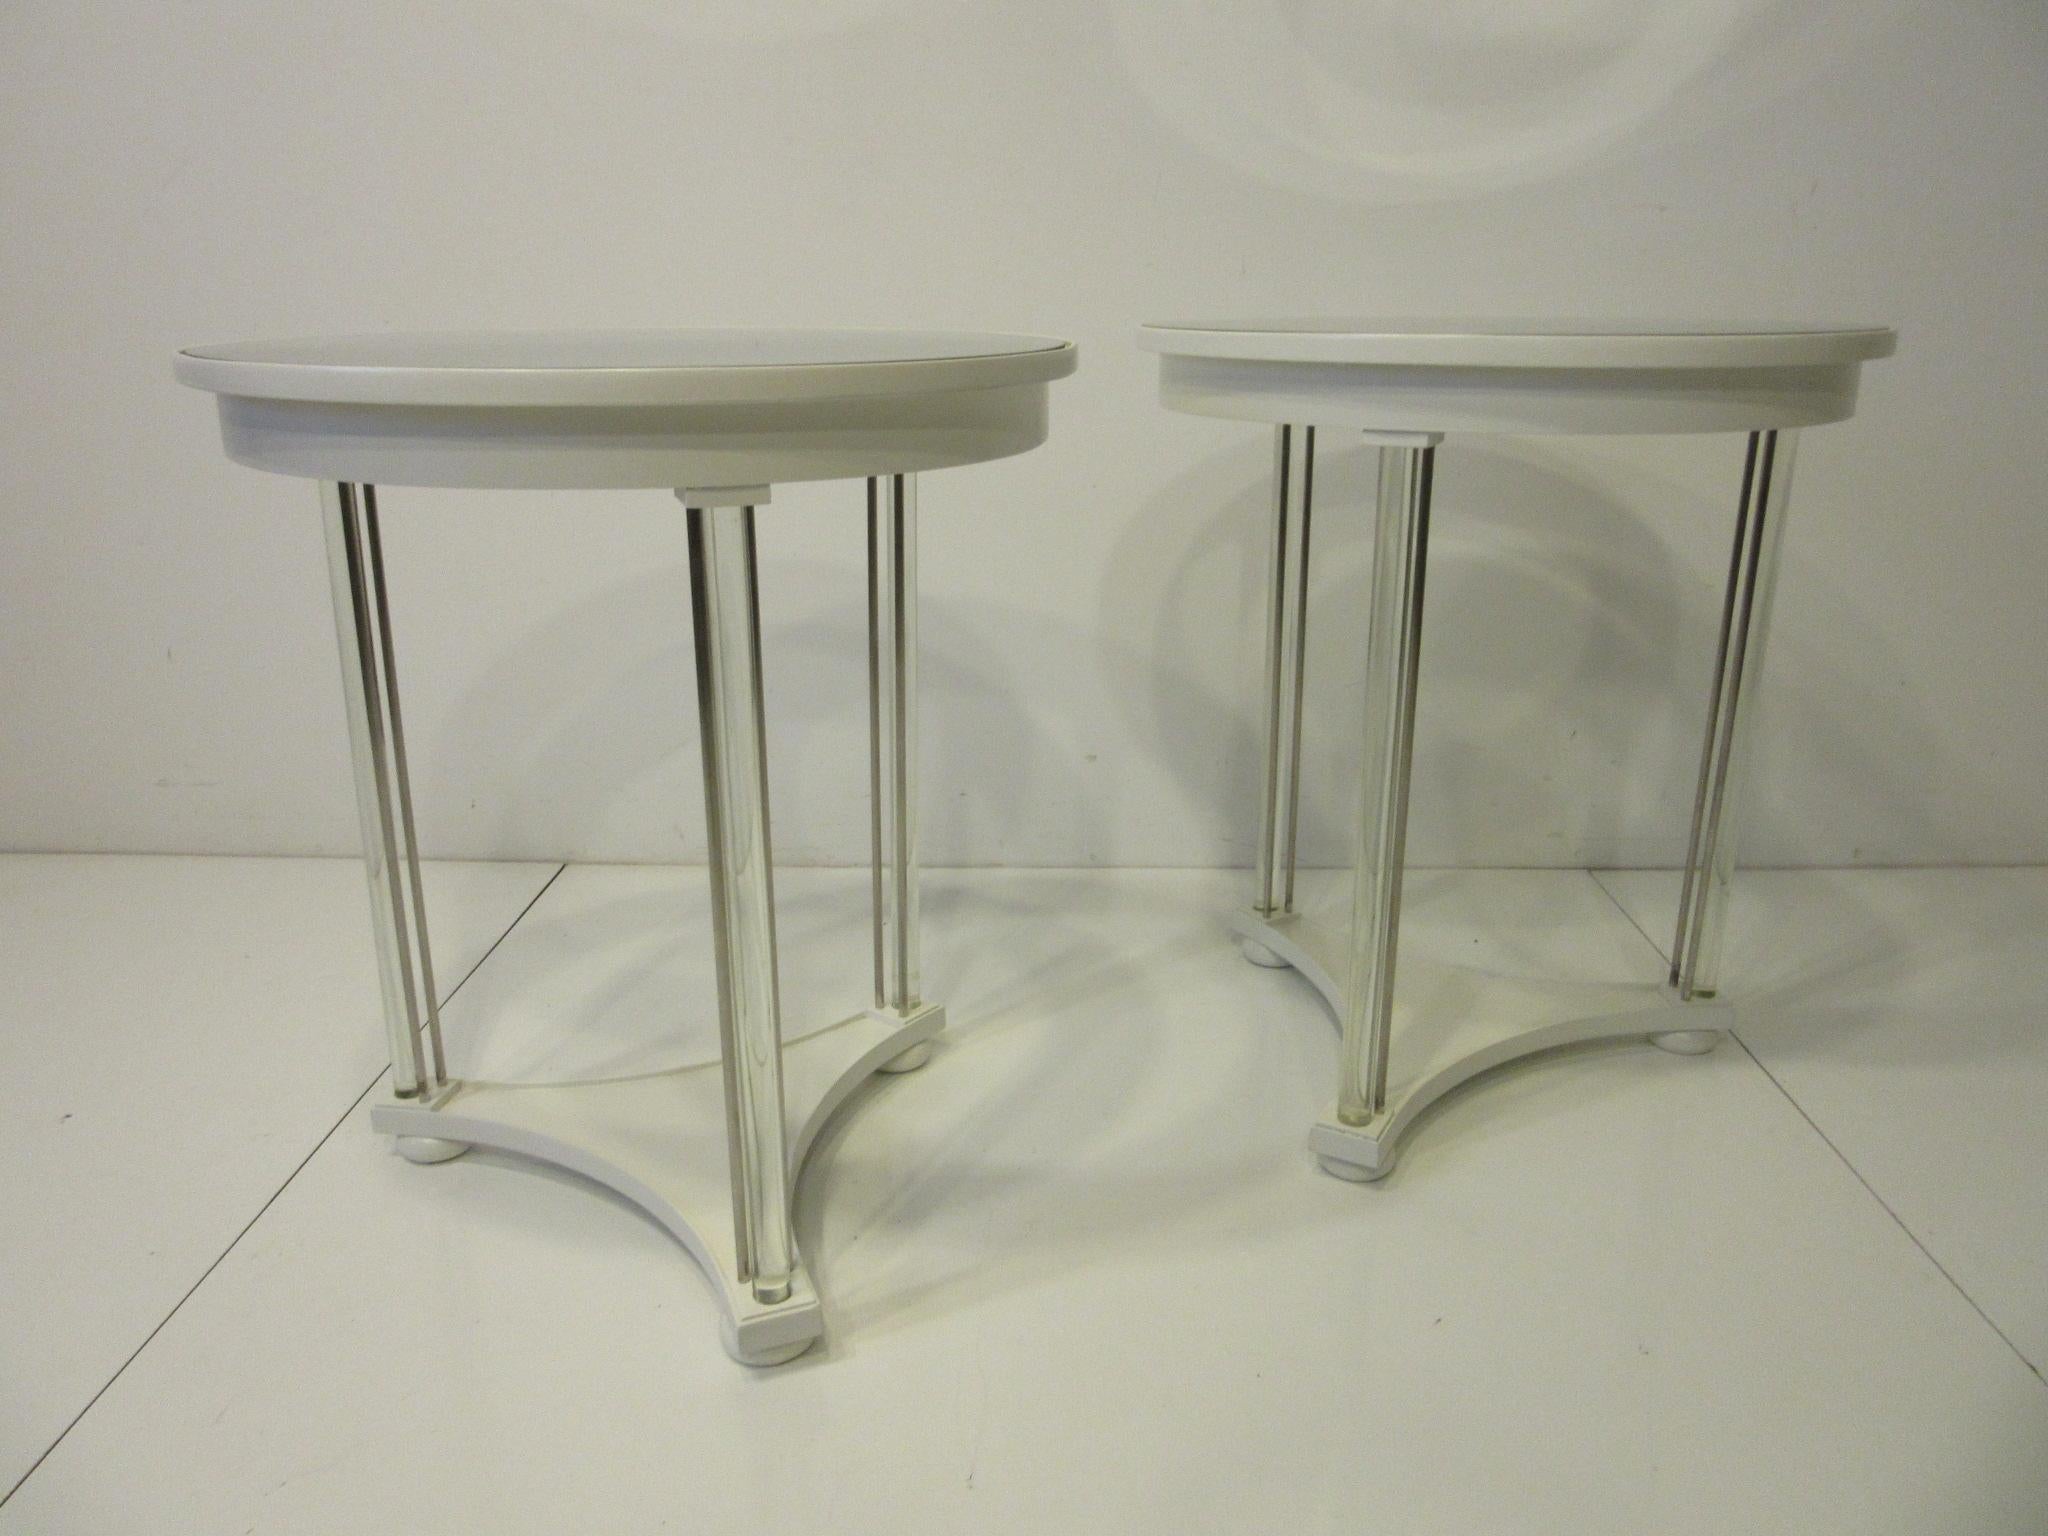 A pair of egg white wood side tables with glass and silver toned metal rod legs having a inset round glass and mirrored top sitting on wood bun styled feet. A sharp simple looking pair of tables that glistens in the light refracting off the heavy